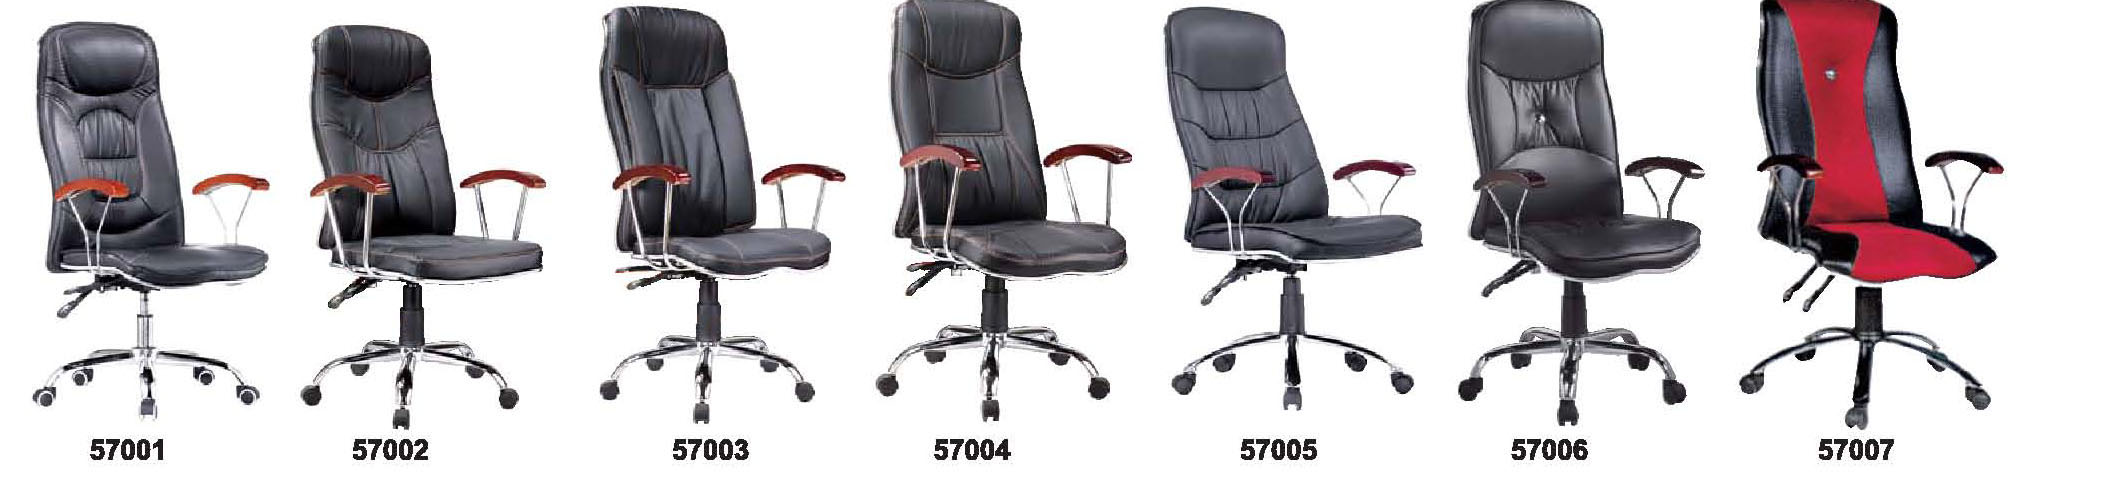 offic chair,Office chairs